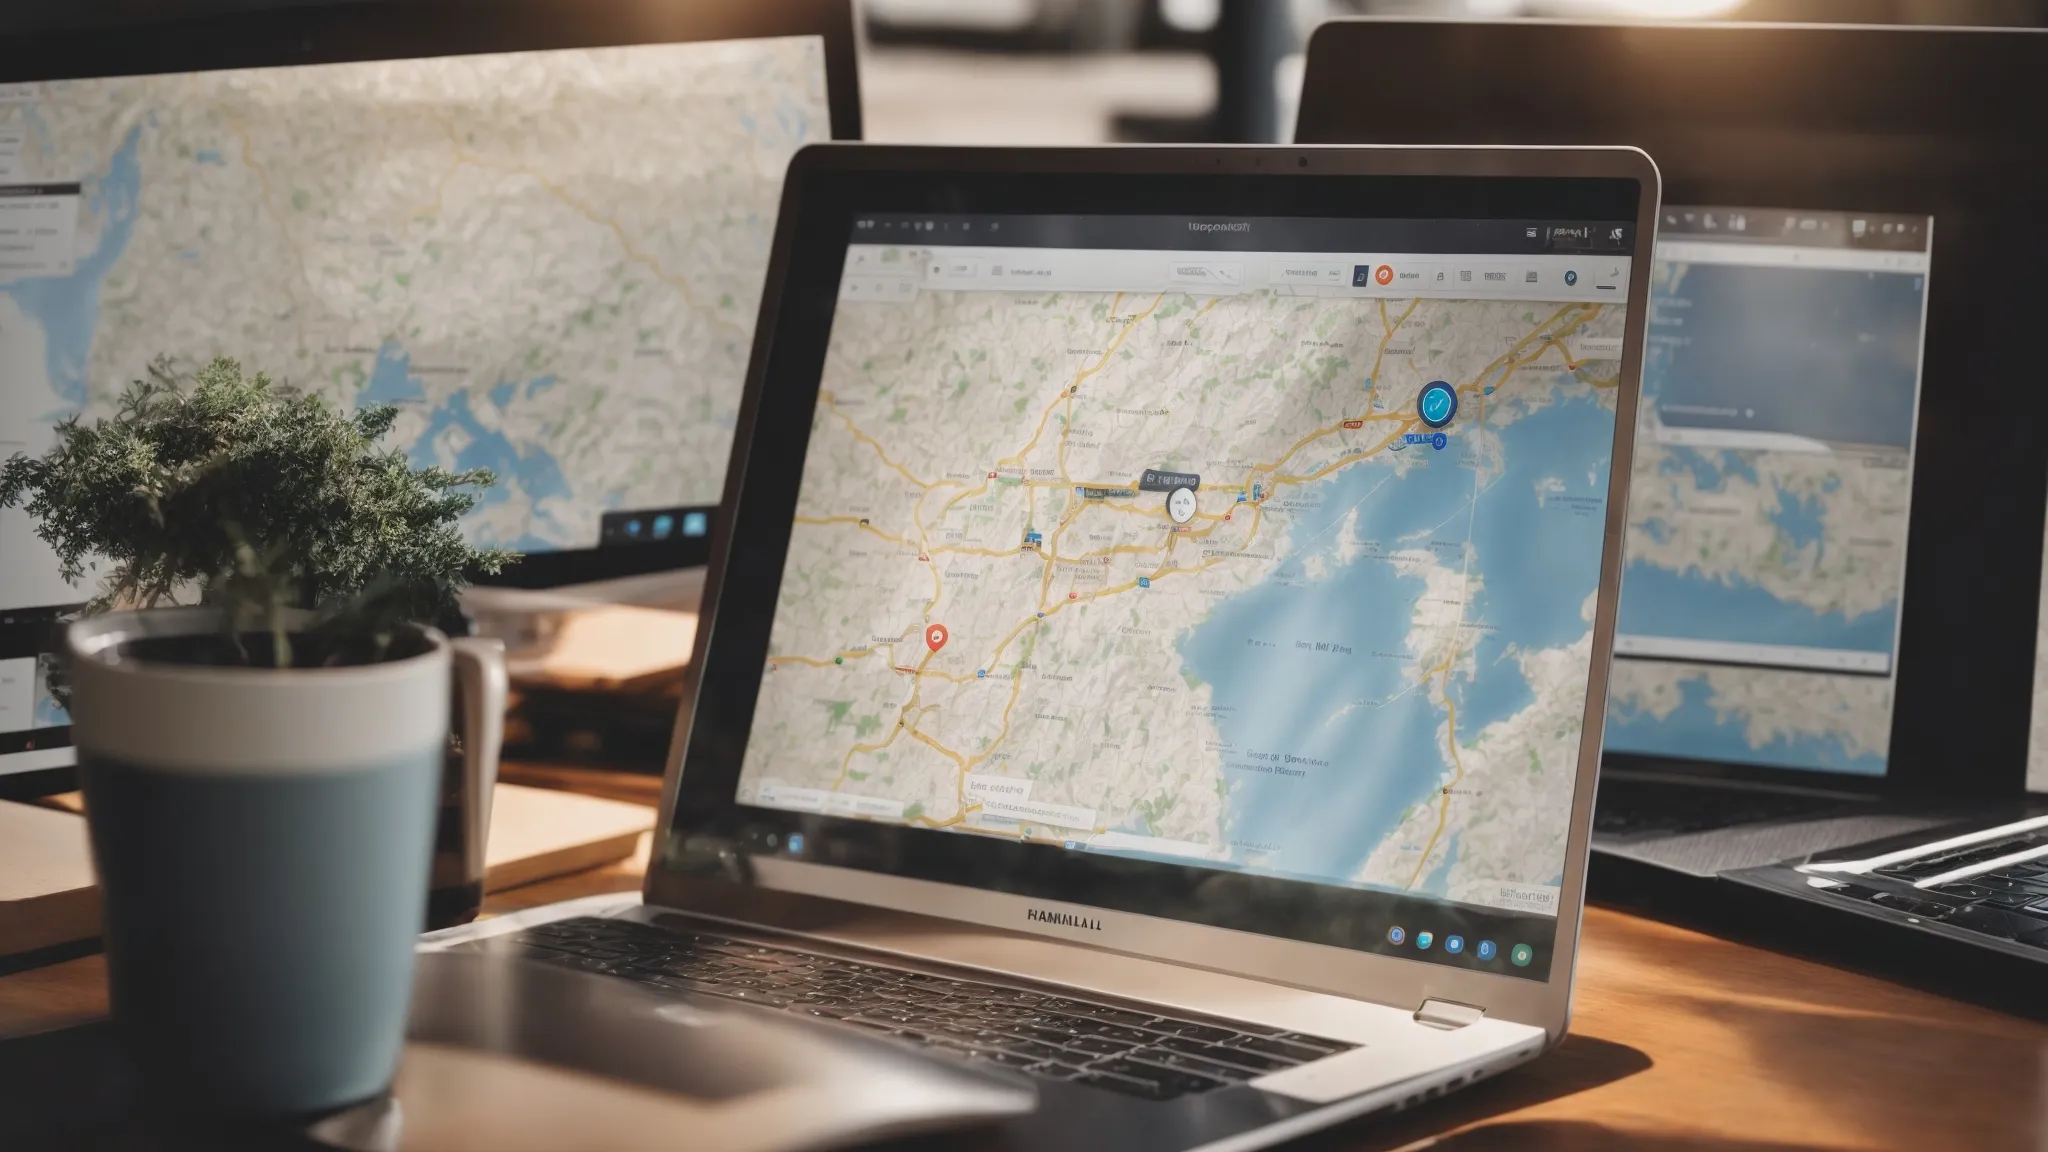 a high-powered laptop open with multiple tabs displaying seo tools and a map pinpointing local businesses on its screen.